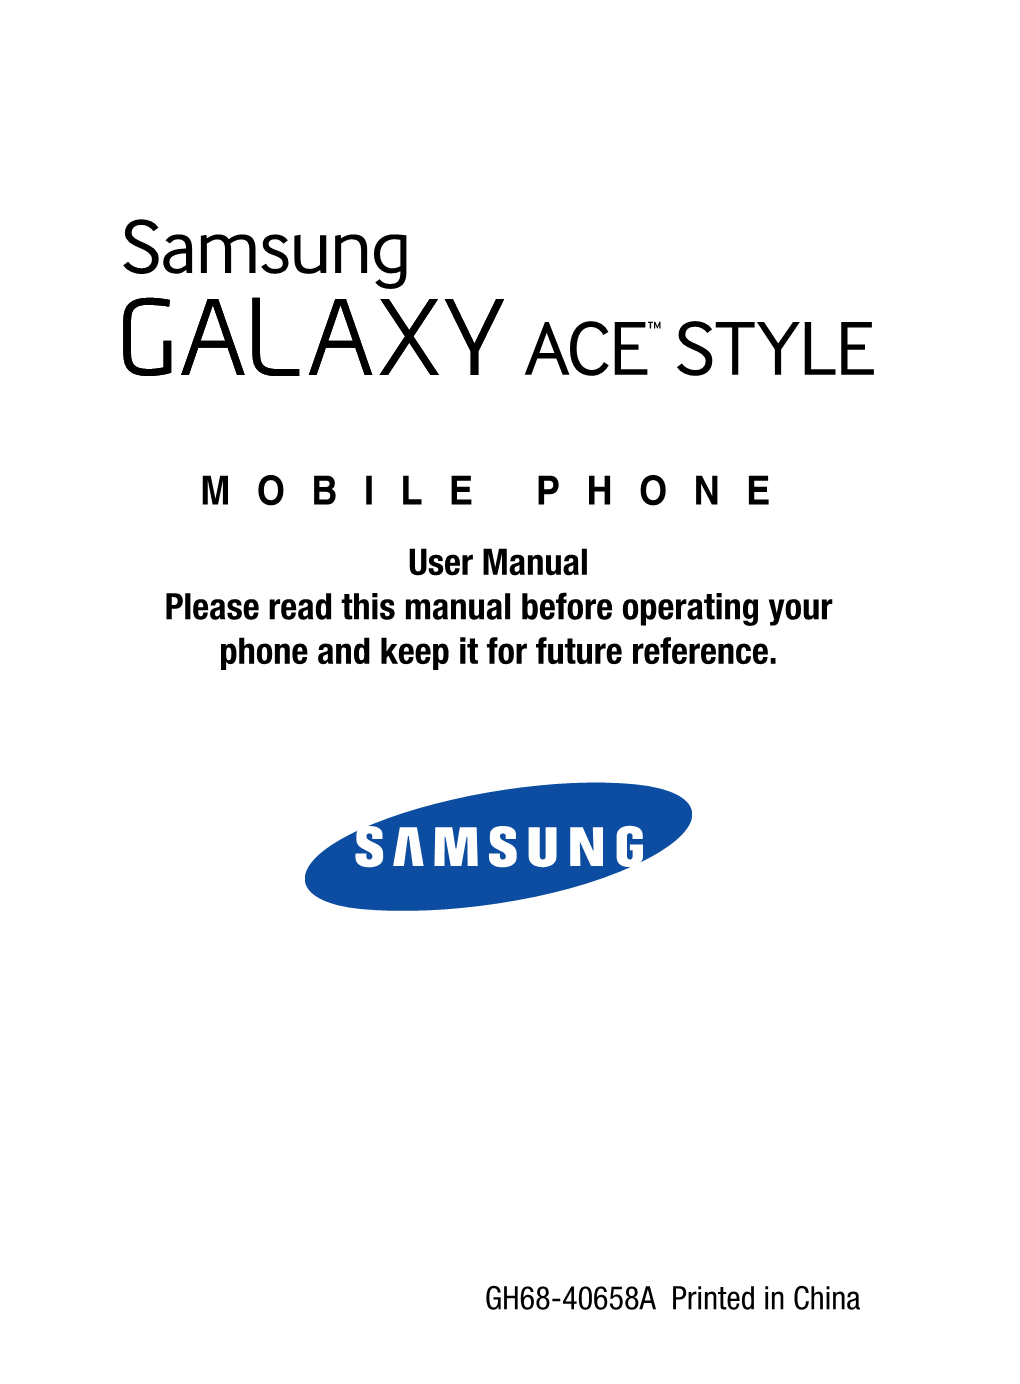 Tracfone SM-S765C Samsung Galaxy ACE STYLE User Manual